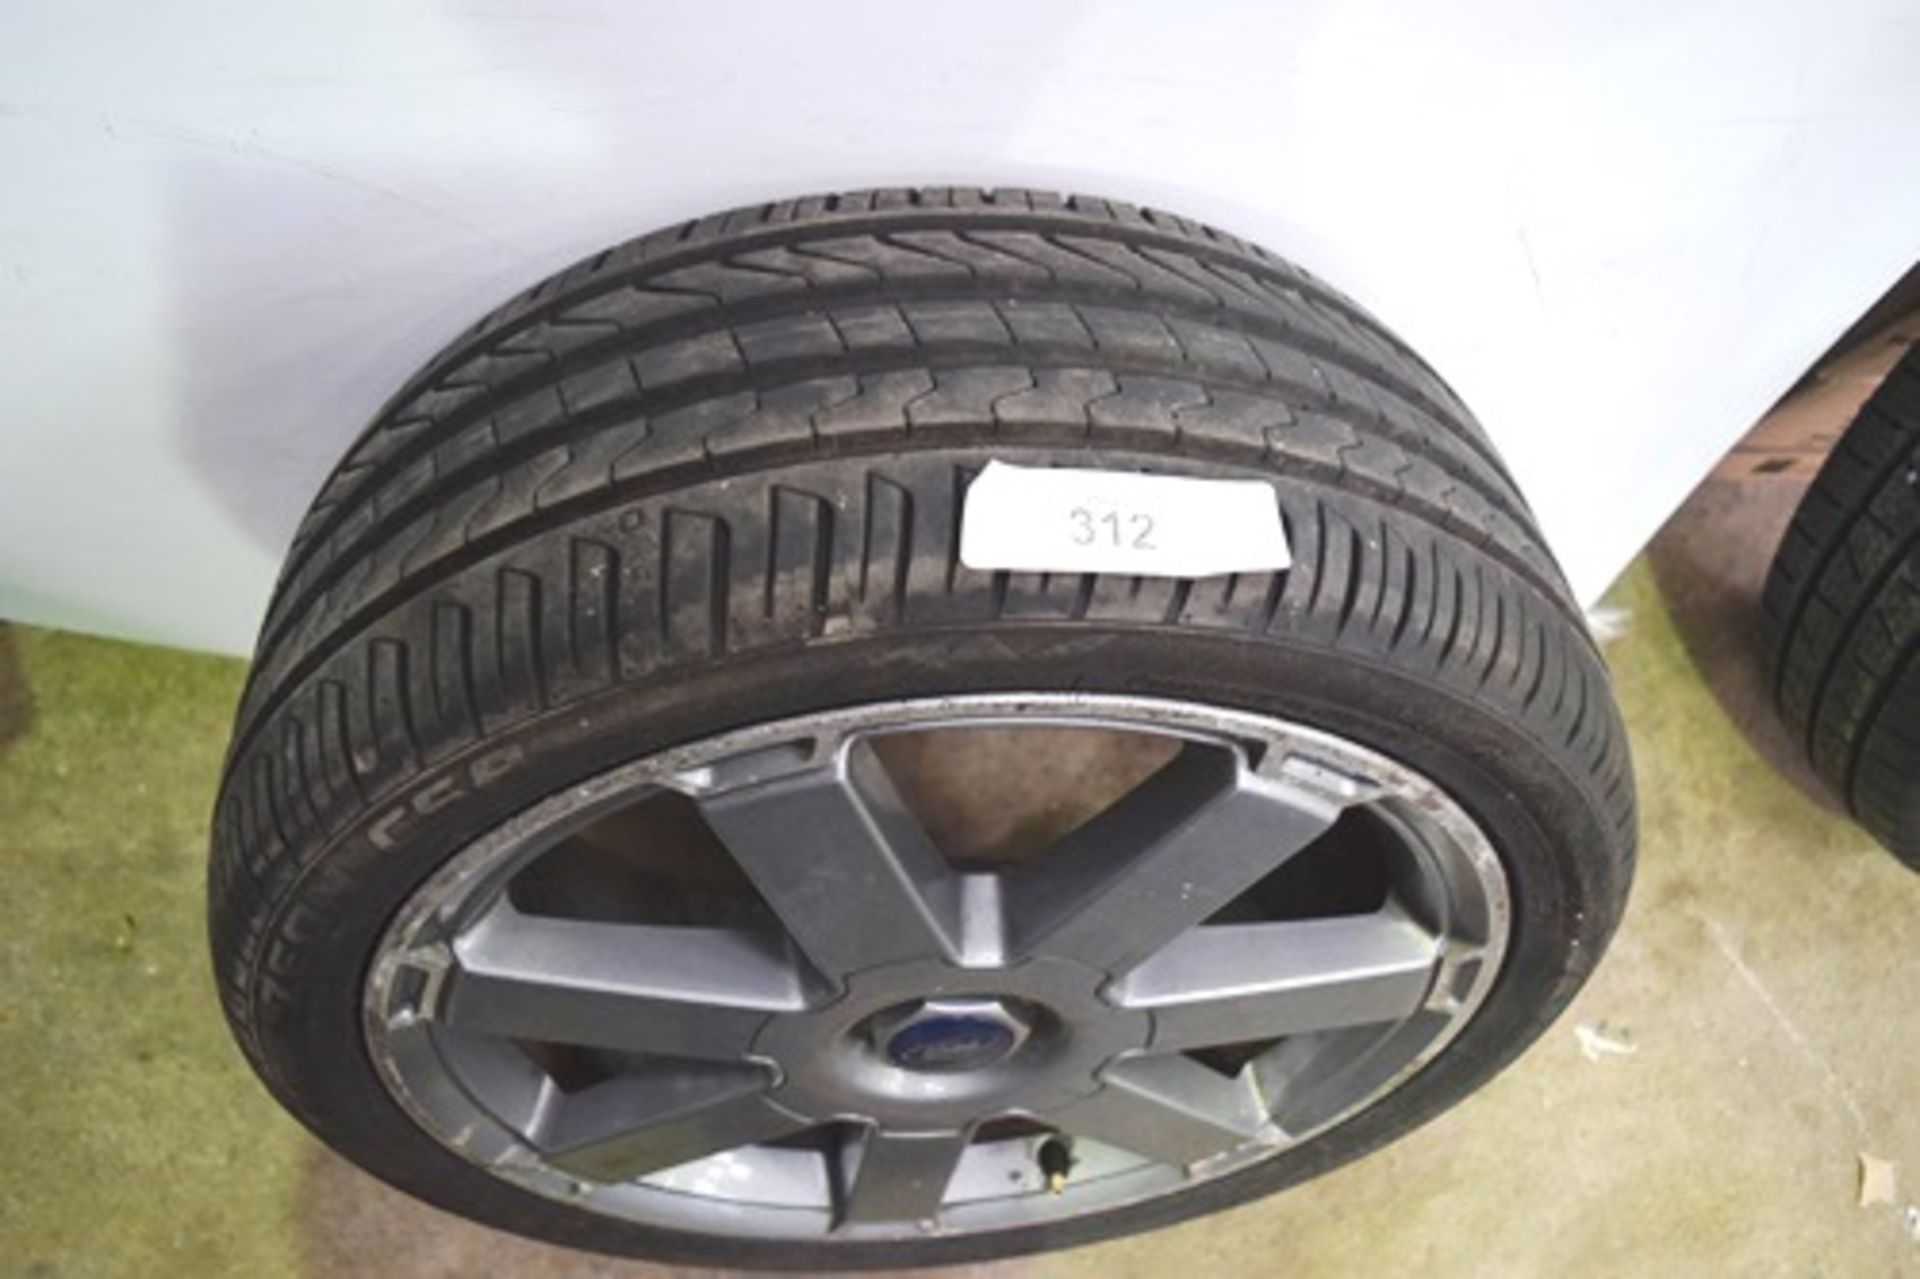 1 x Ford 5 stud alloy wheel fitted with Cooper Zeon C58 tyre, size 225/40R18 - Second-hand (GSend)